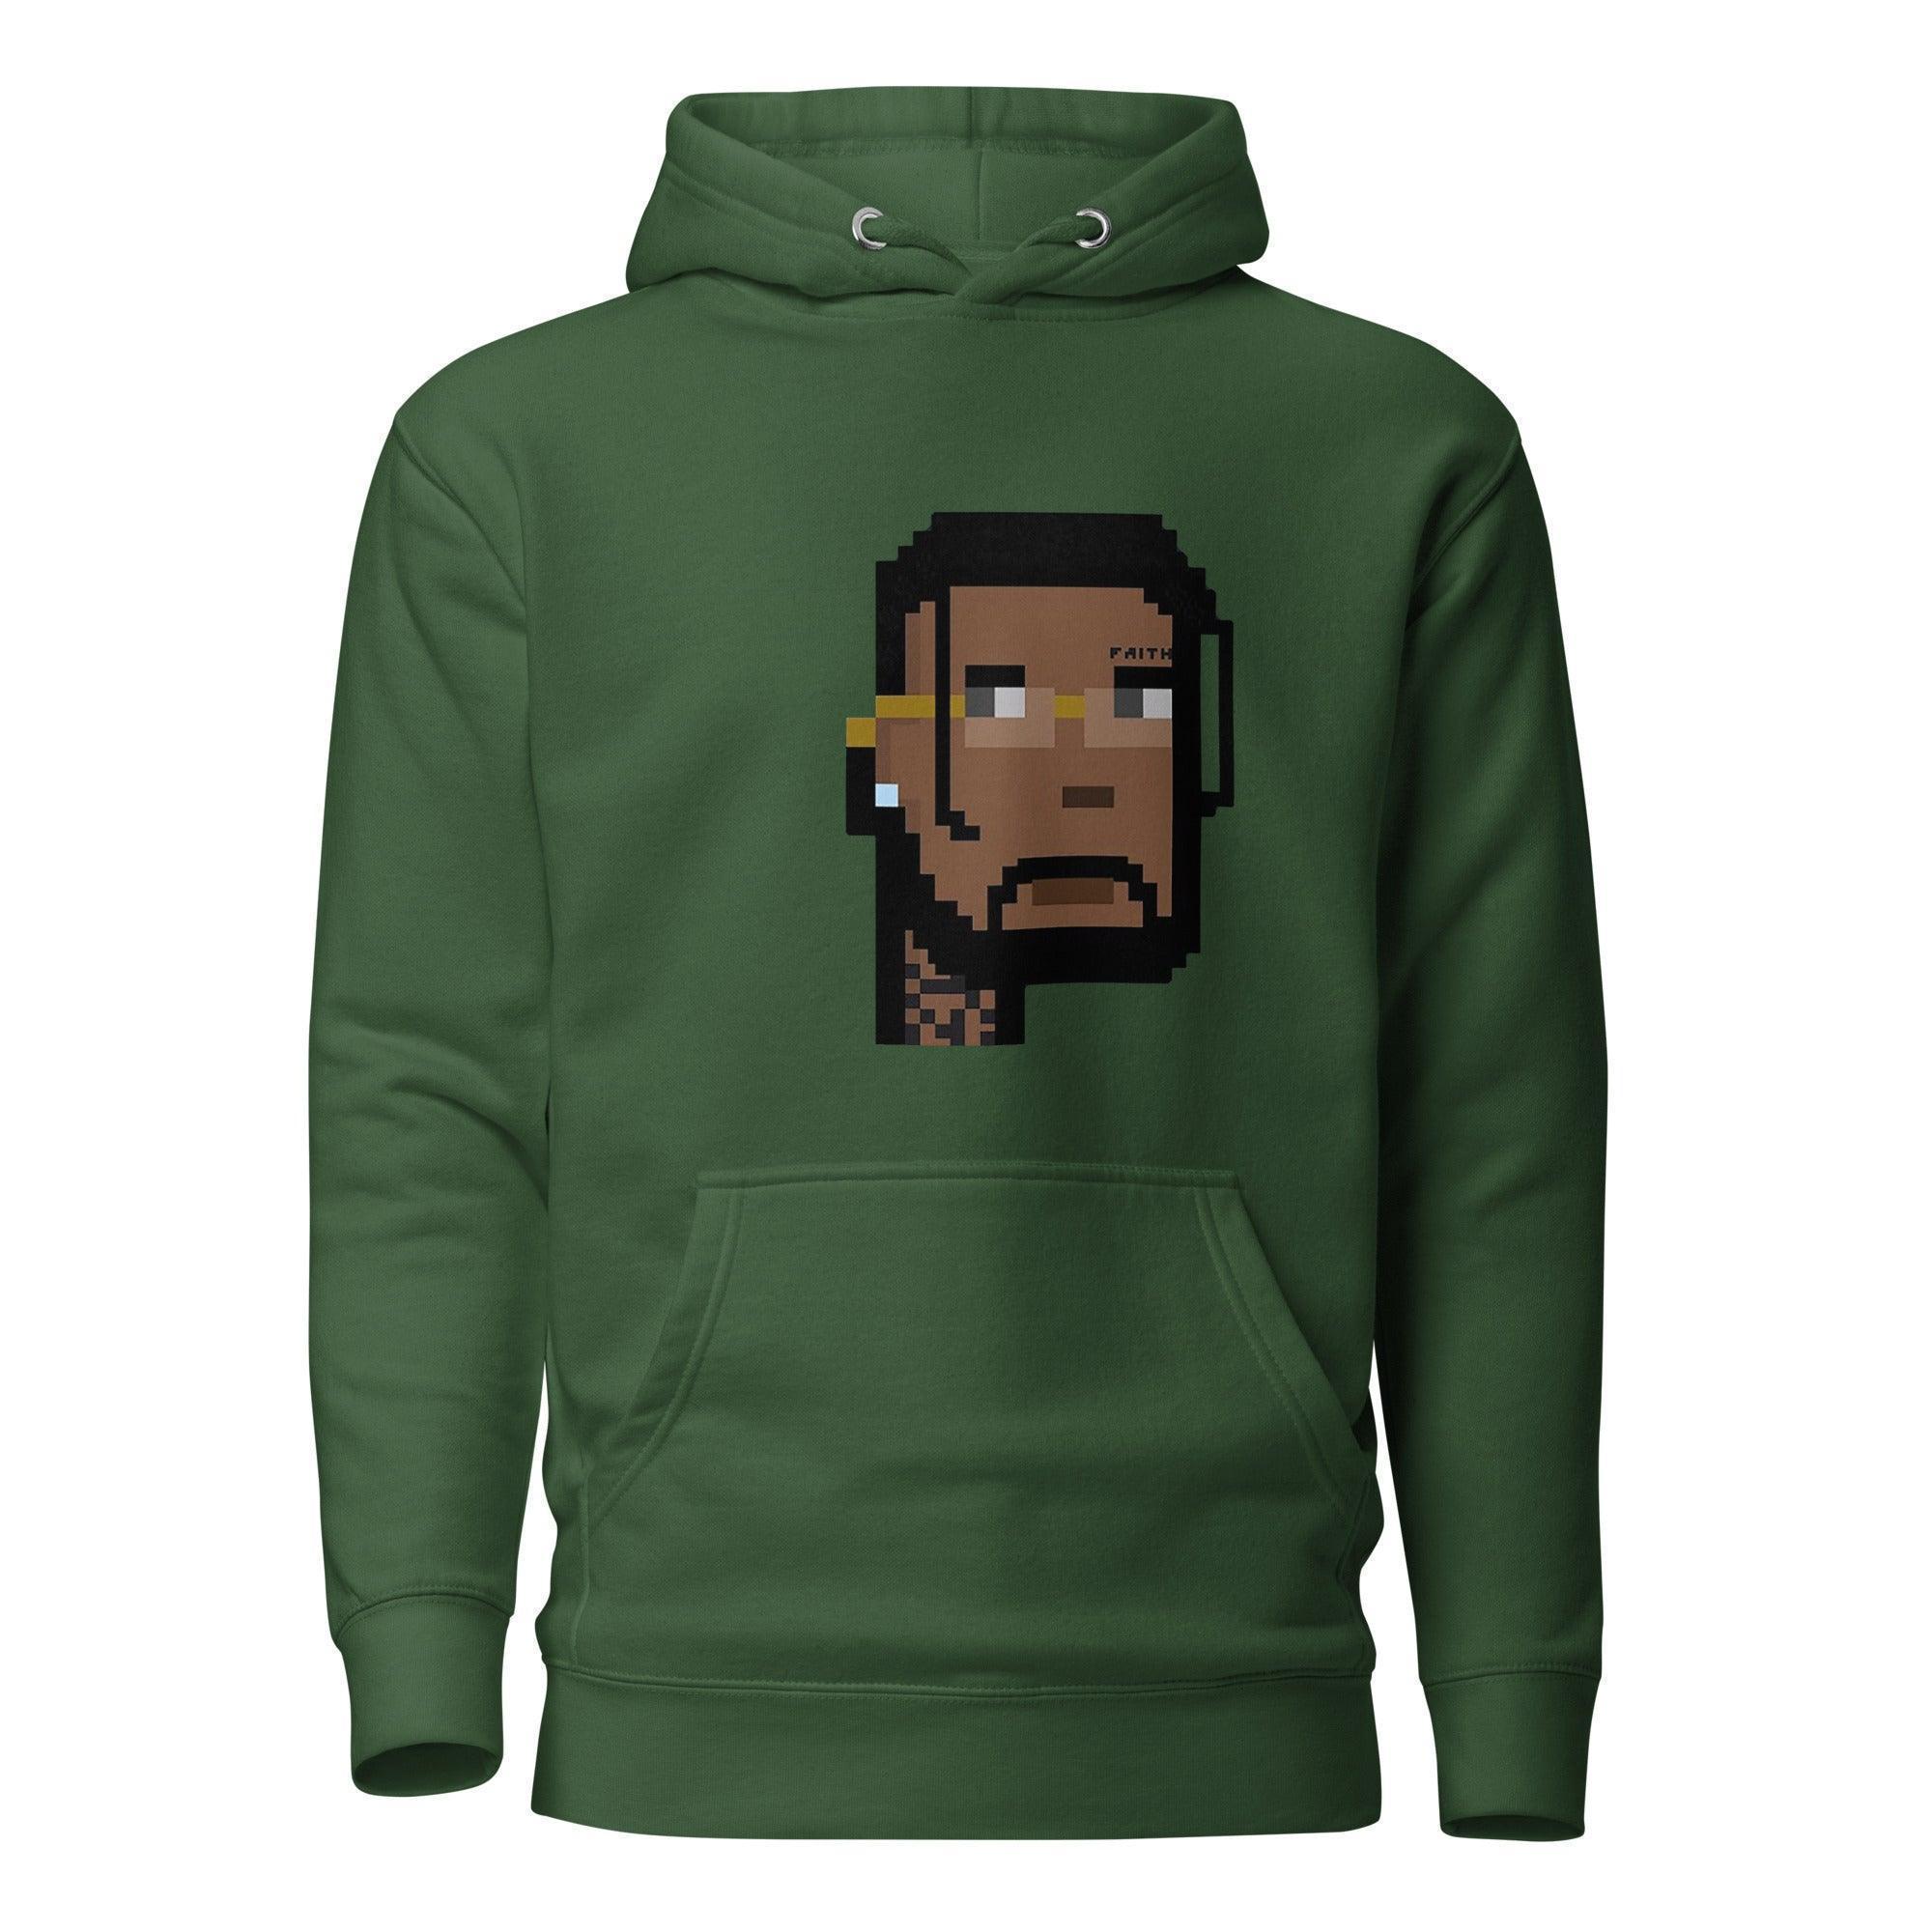 Celebrity Punk 1 Pullover Hoodie - InvestmenTees